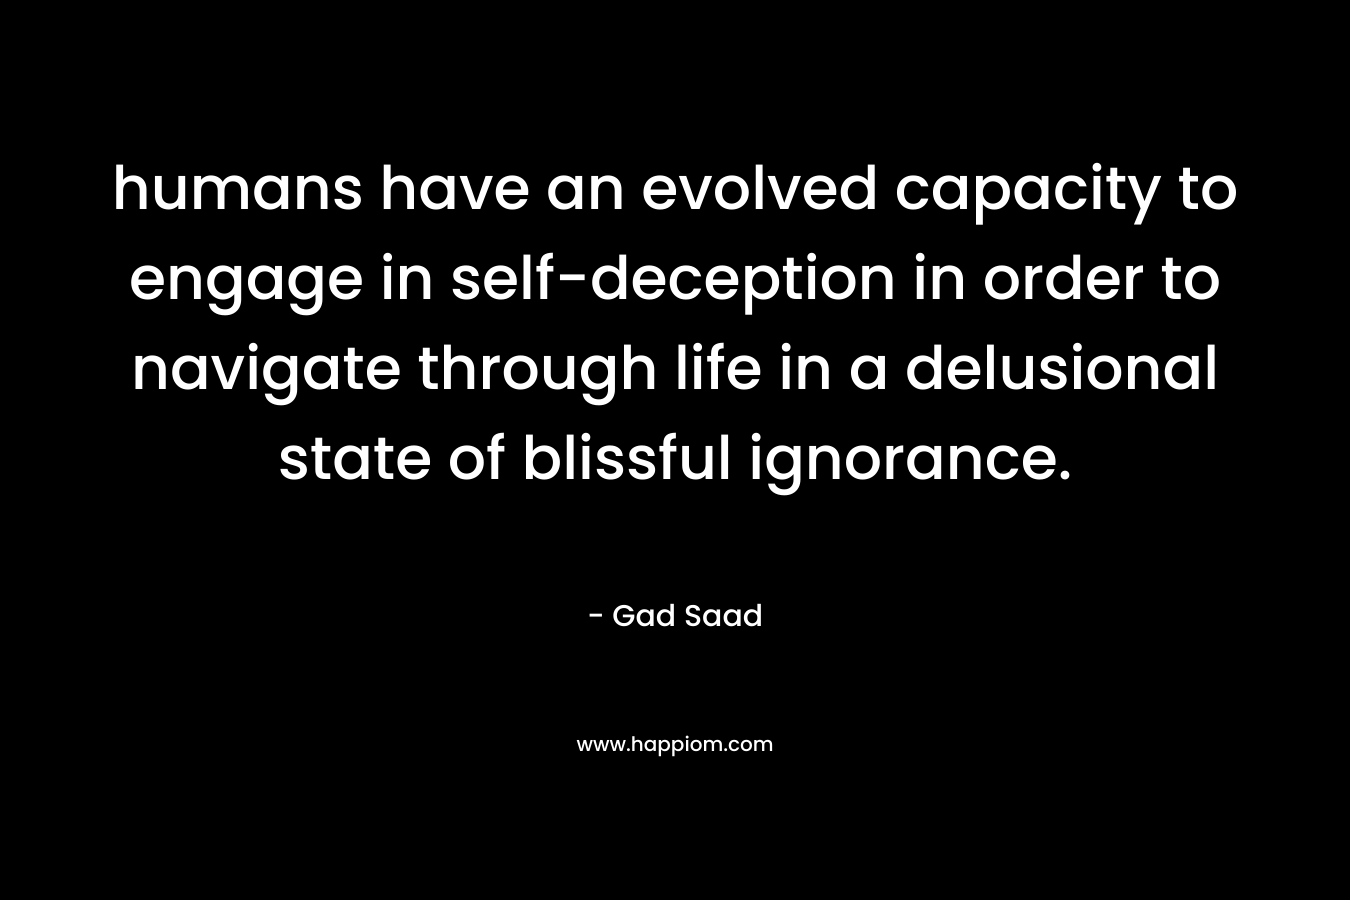 humans have an evolved capacity to engage in self-deception in order to navigate through life in a delusional state of blissful ignorance.